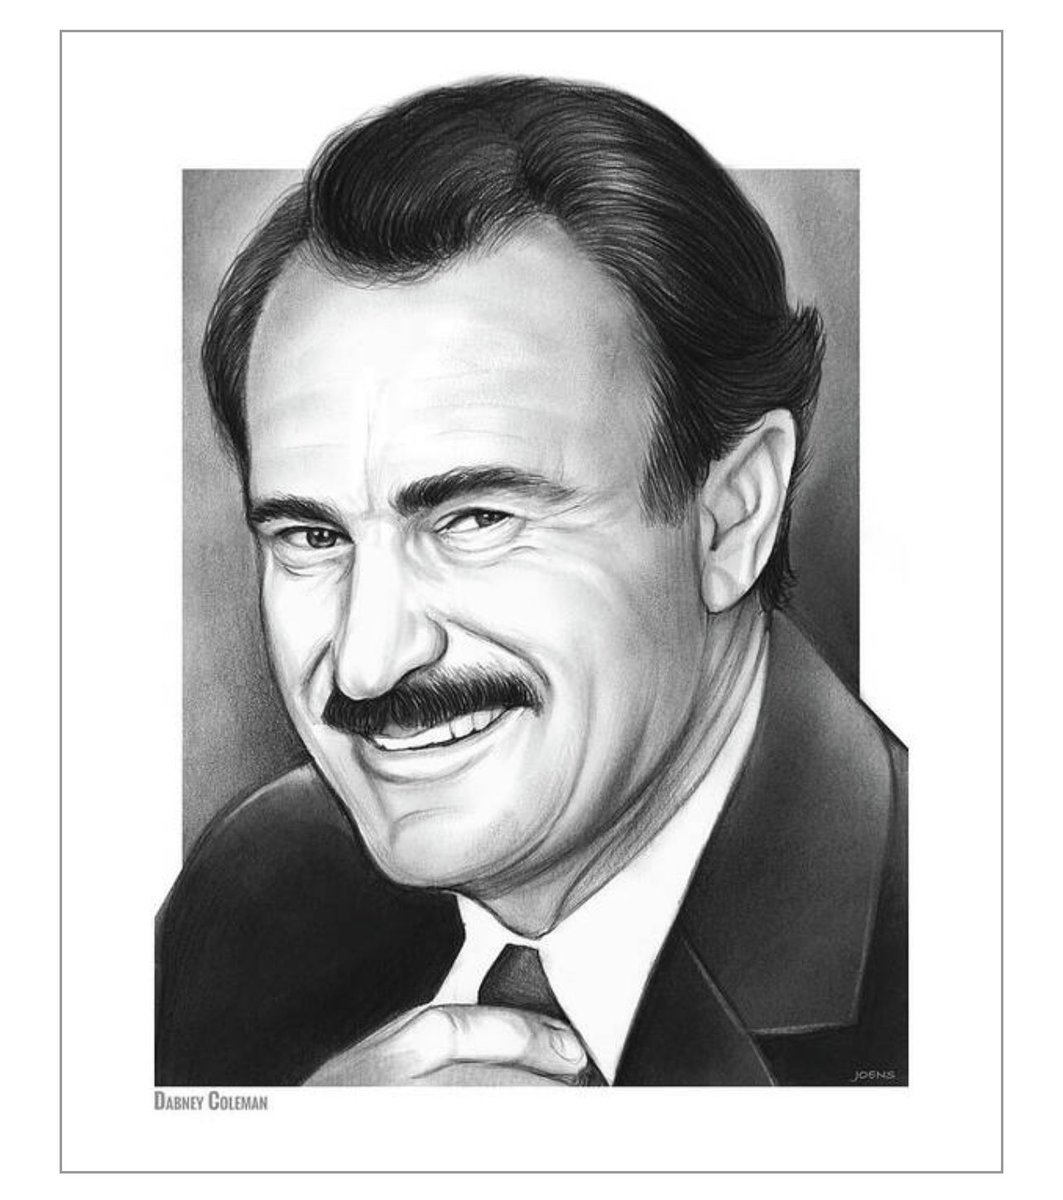 Dabney Coleman, Actor from 9 to 5 and Tootsie, Dead at 92 The Emmy-winning character actor appeared in more than 60 projects in his six-decade career